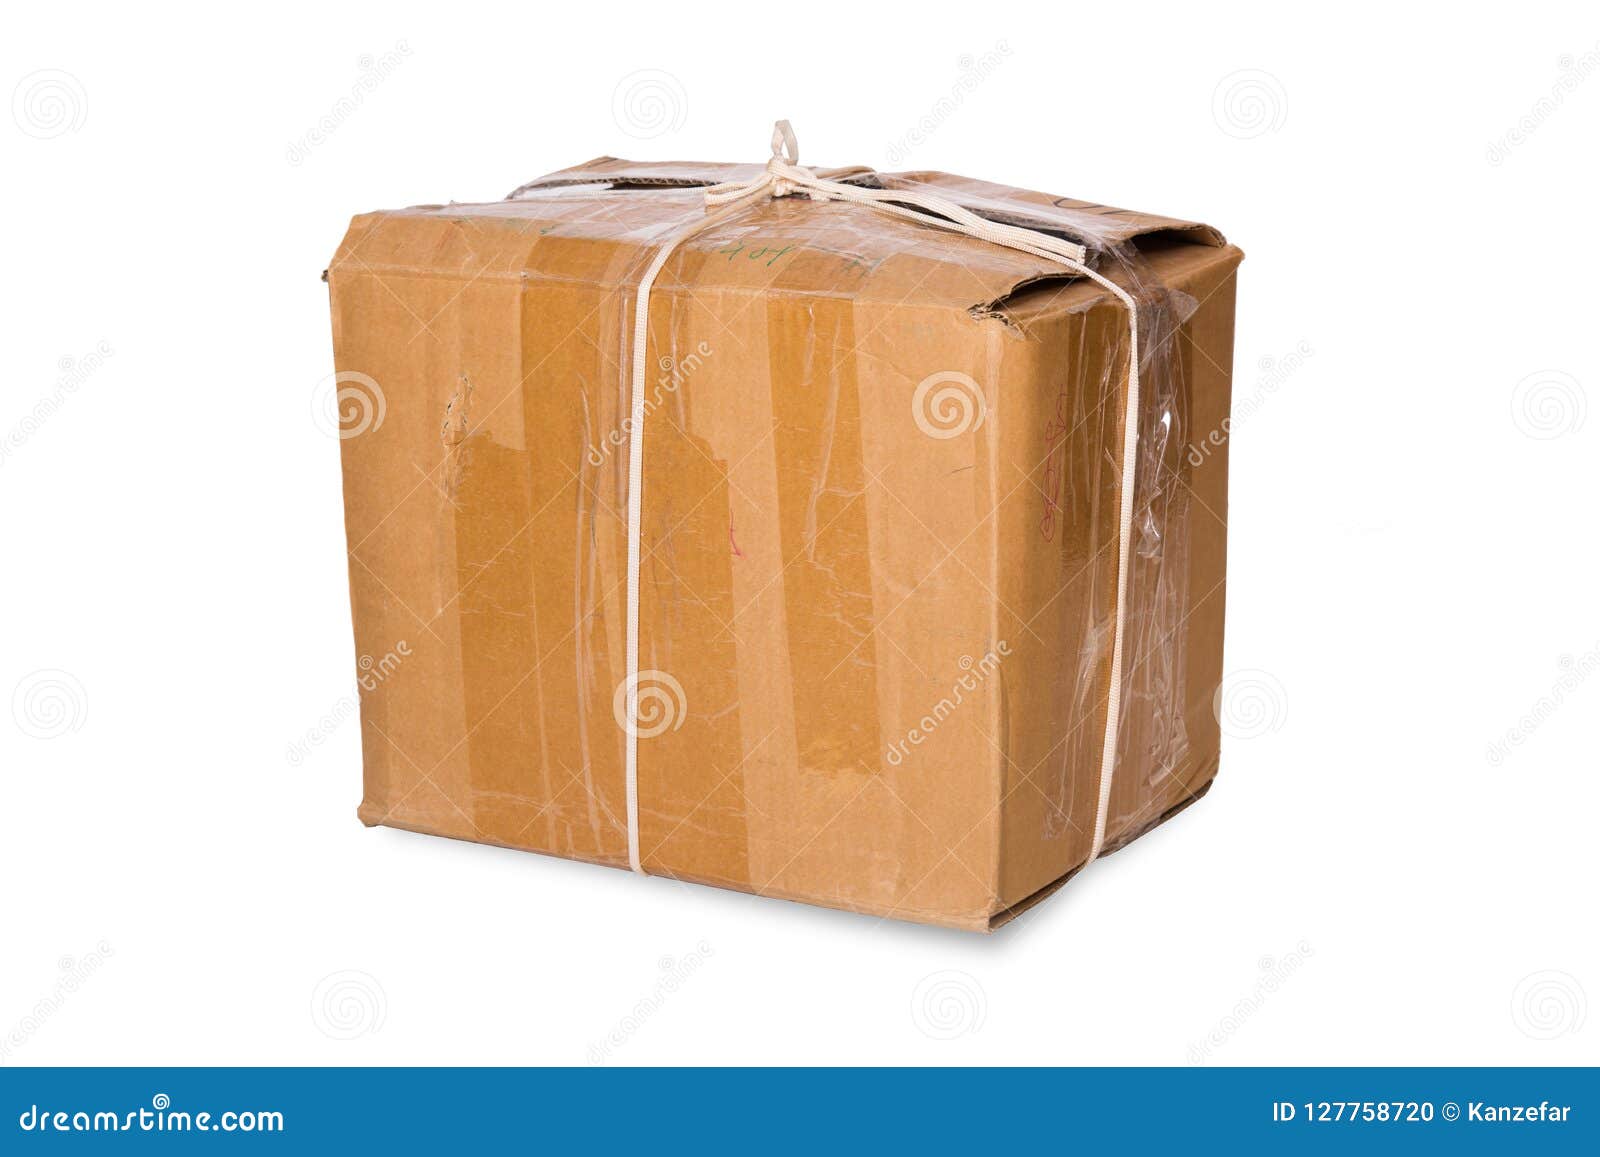 Old Cardboard Box Tied with a Rope Stock Photo - Image of